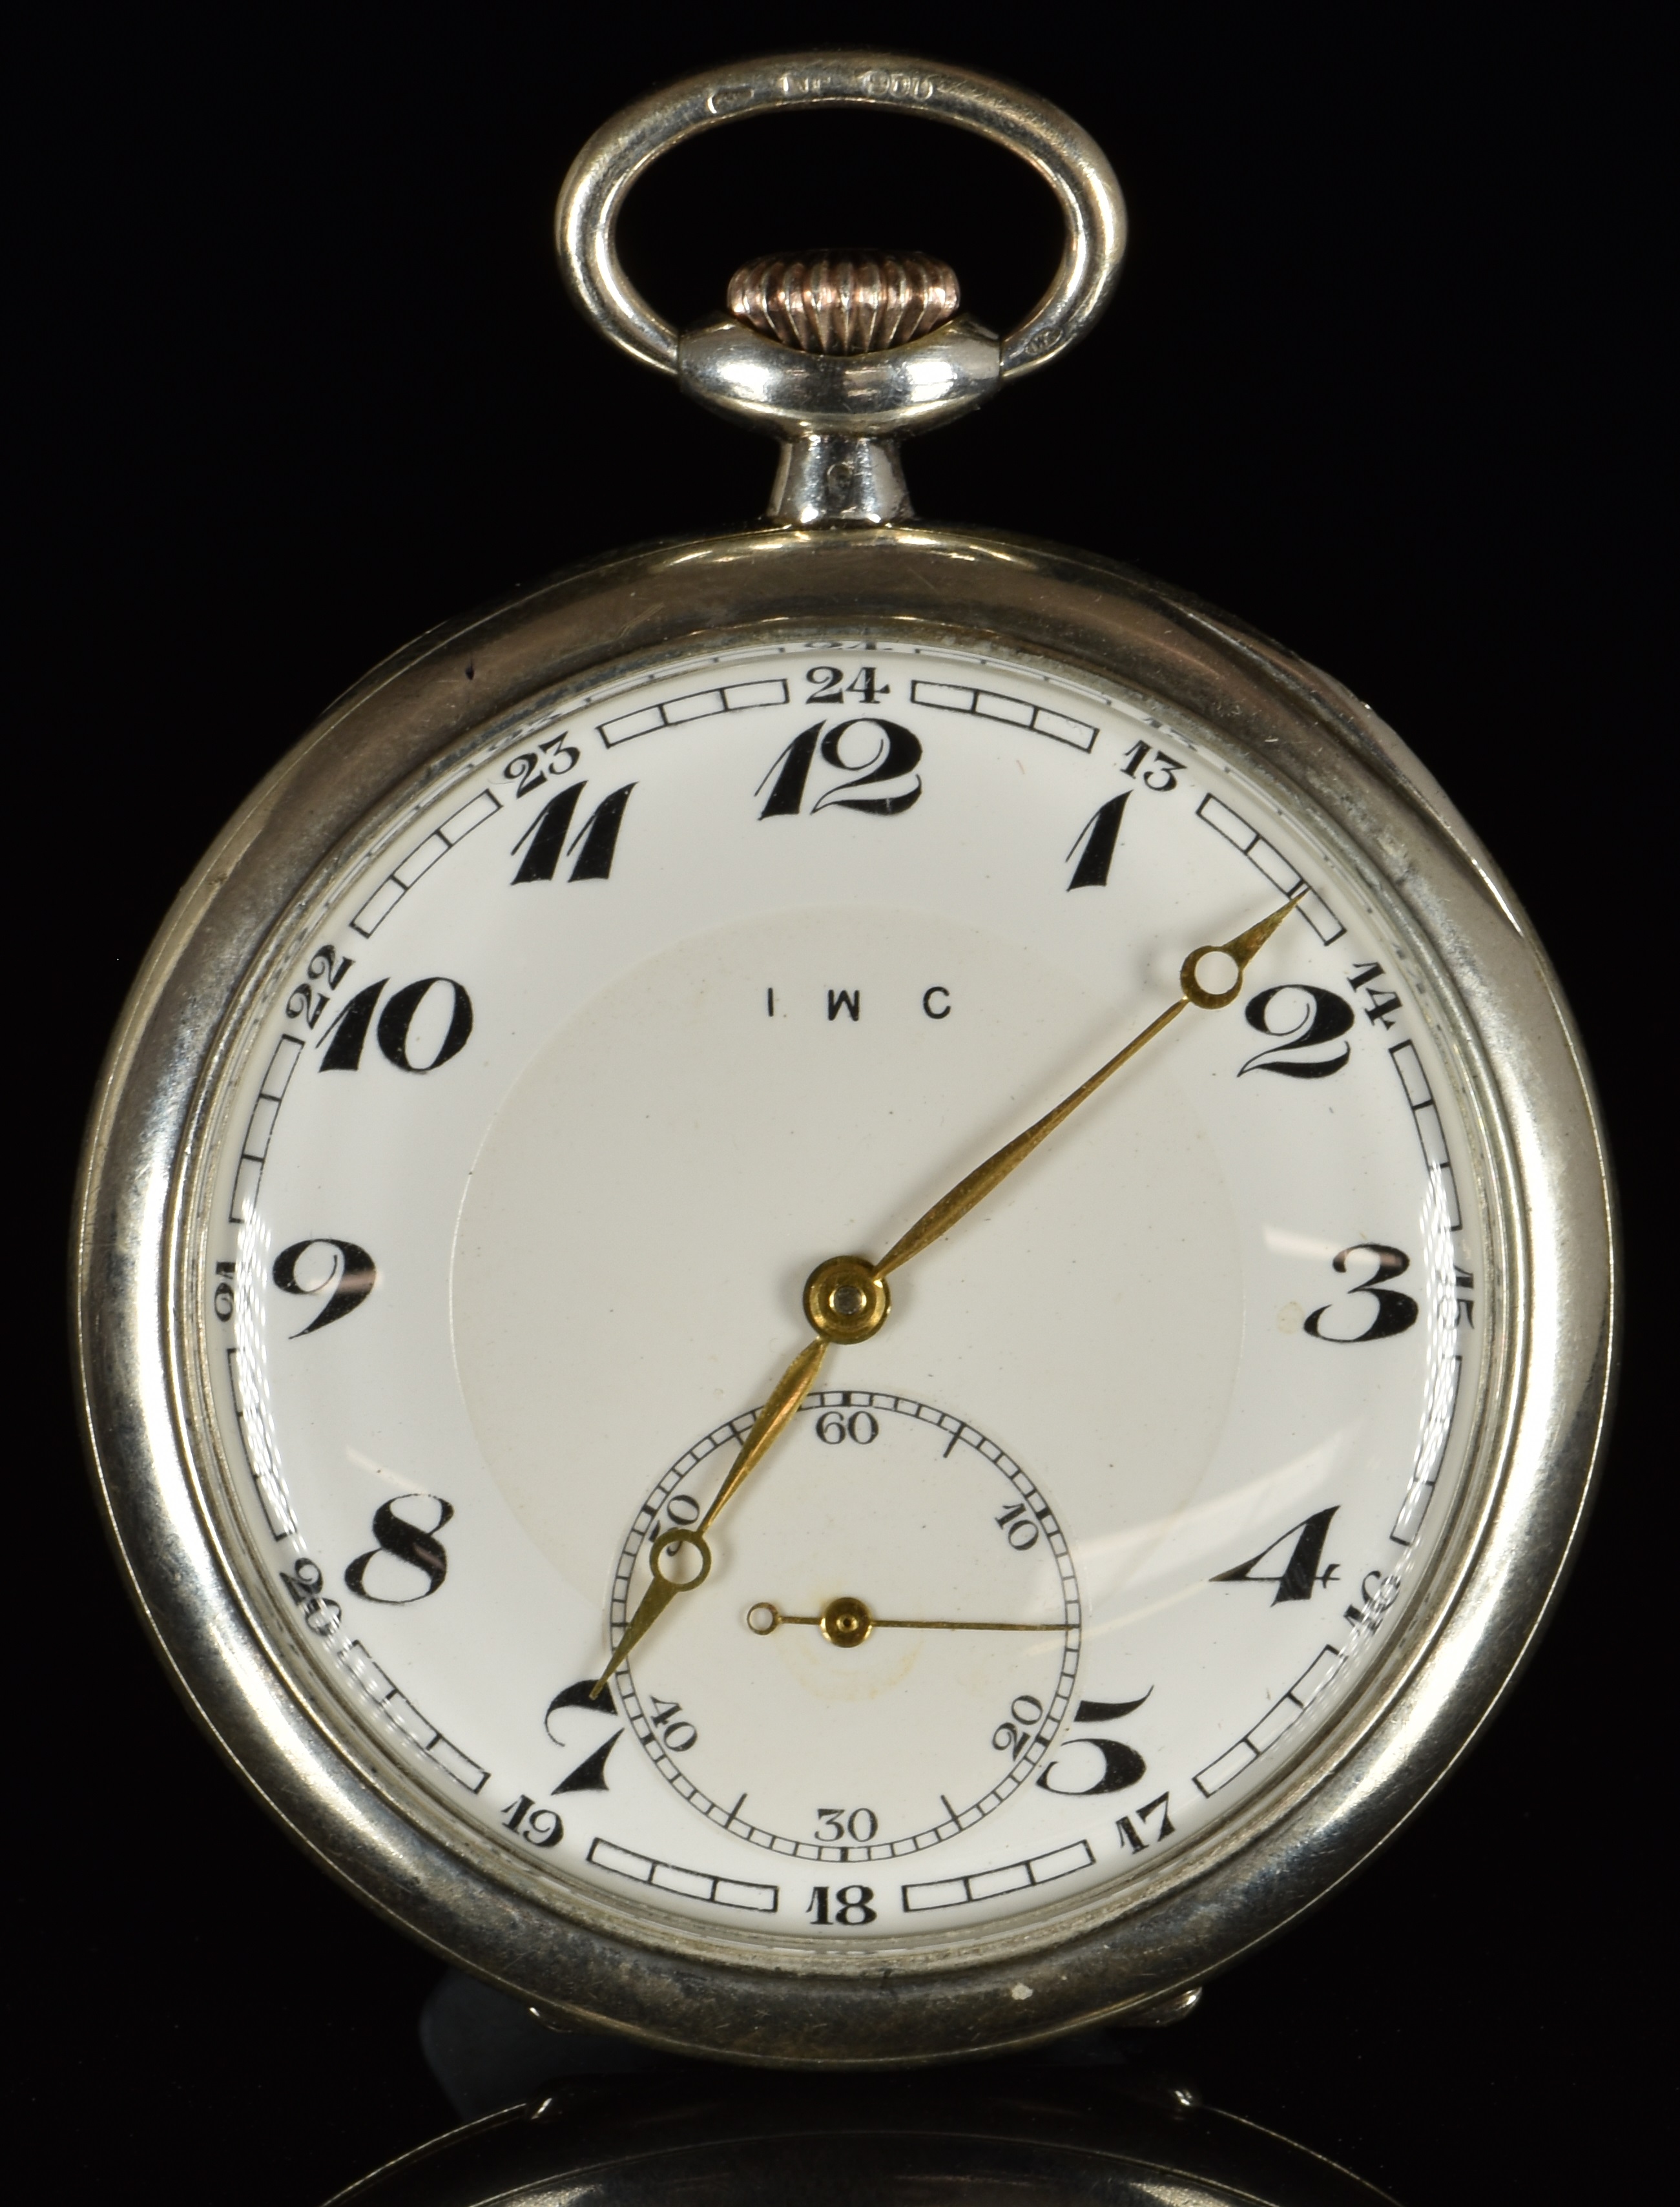 International Watch Company (IWC) silver keyless winding open faced pocket watch with subsidiary